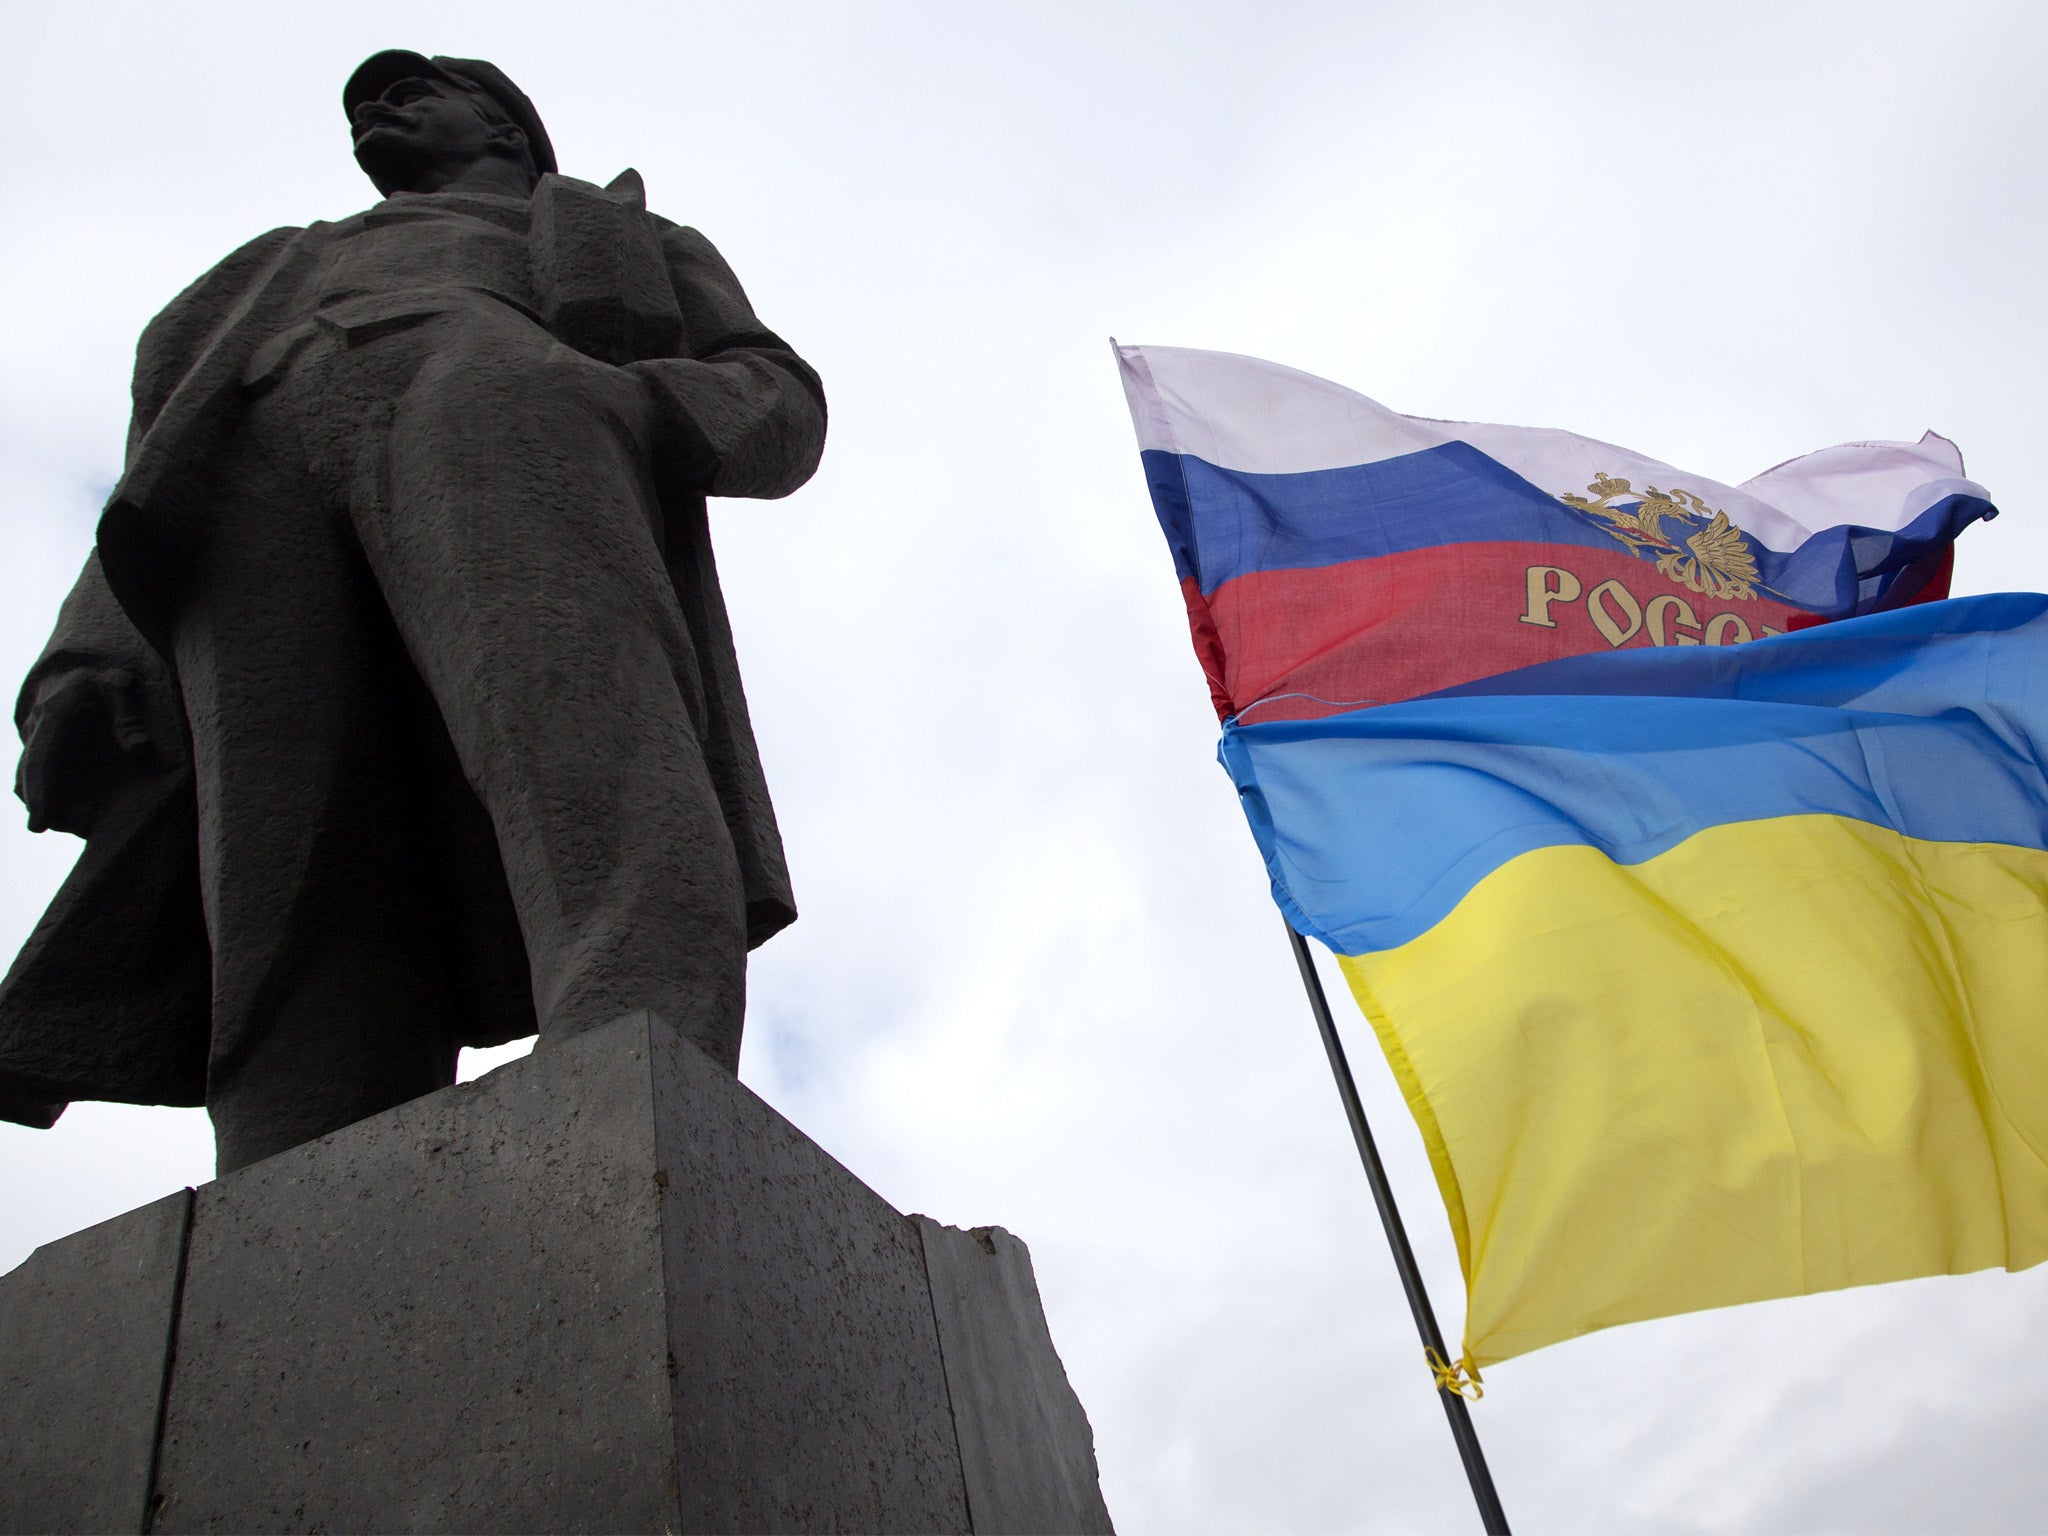 Russian and Ukrainian flags fly next to the statue of Vladimir Lenin, in Donetsk, eastern Ukraine